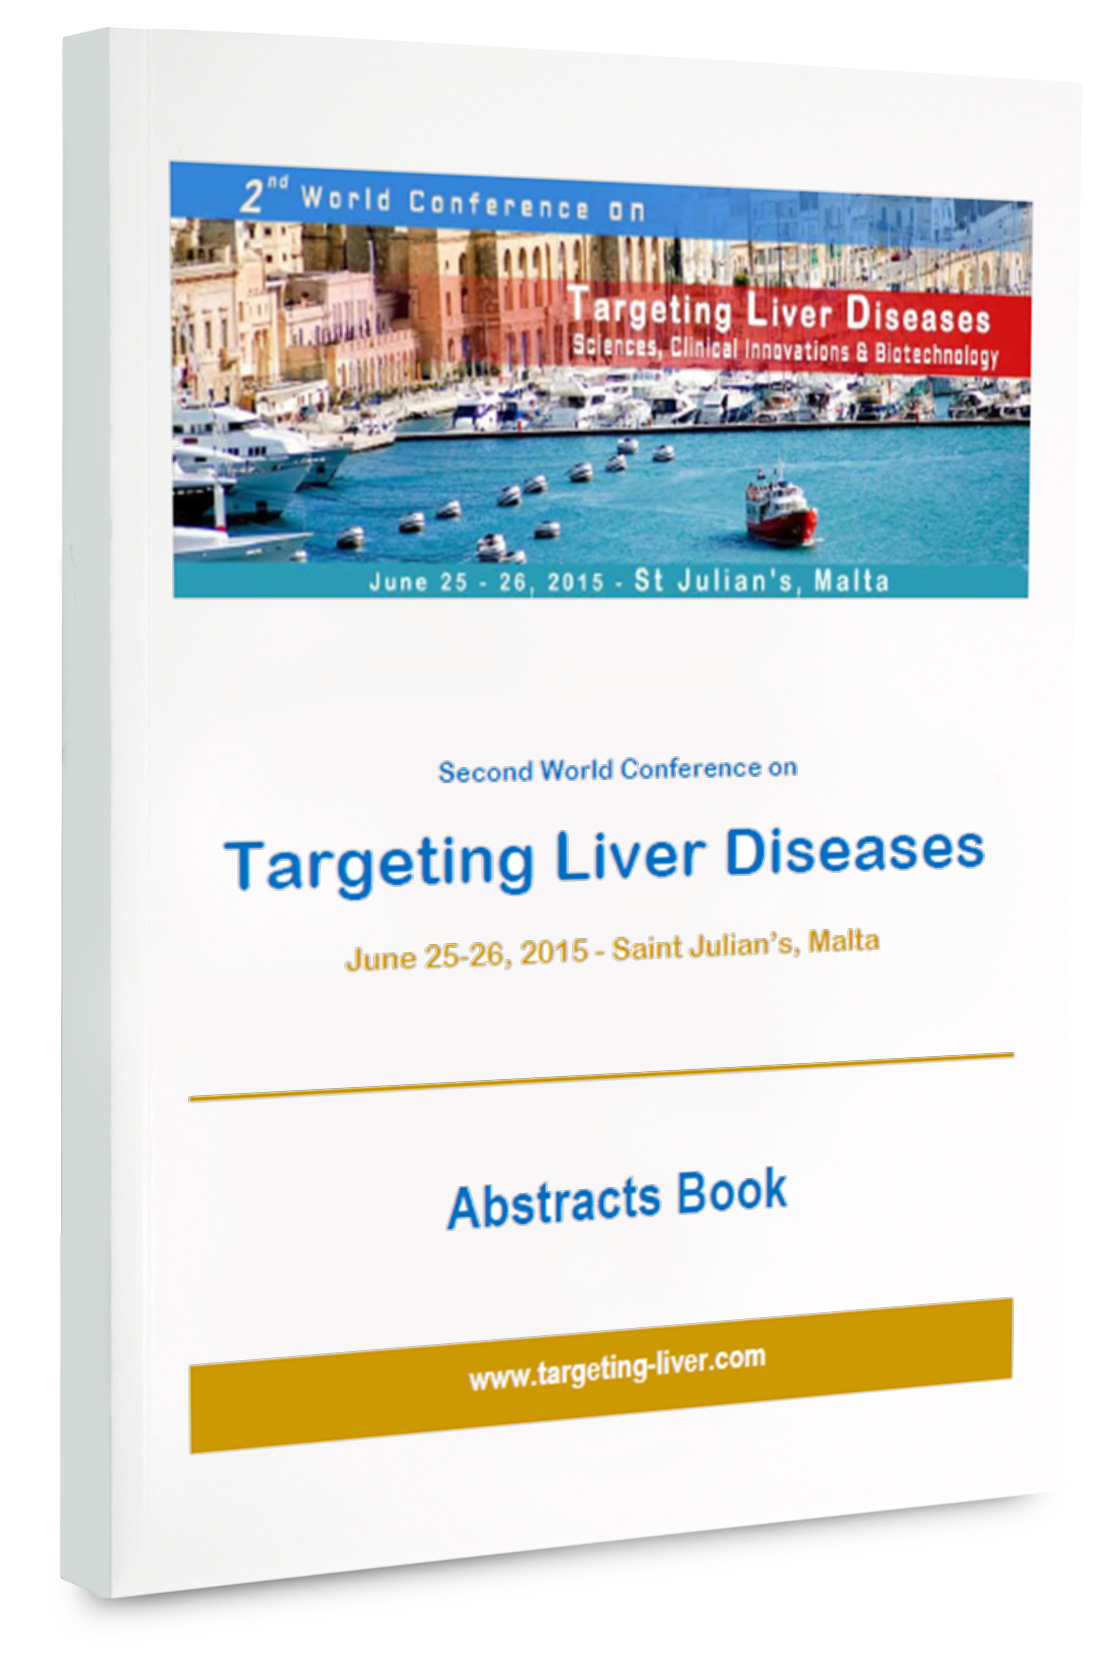 The Abstracts Book of the second World Conference on Targeting Liver Diseases is now available